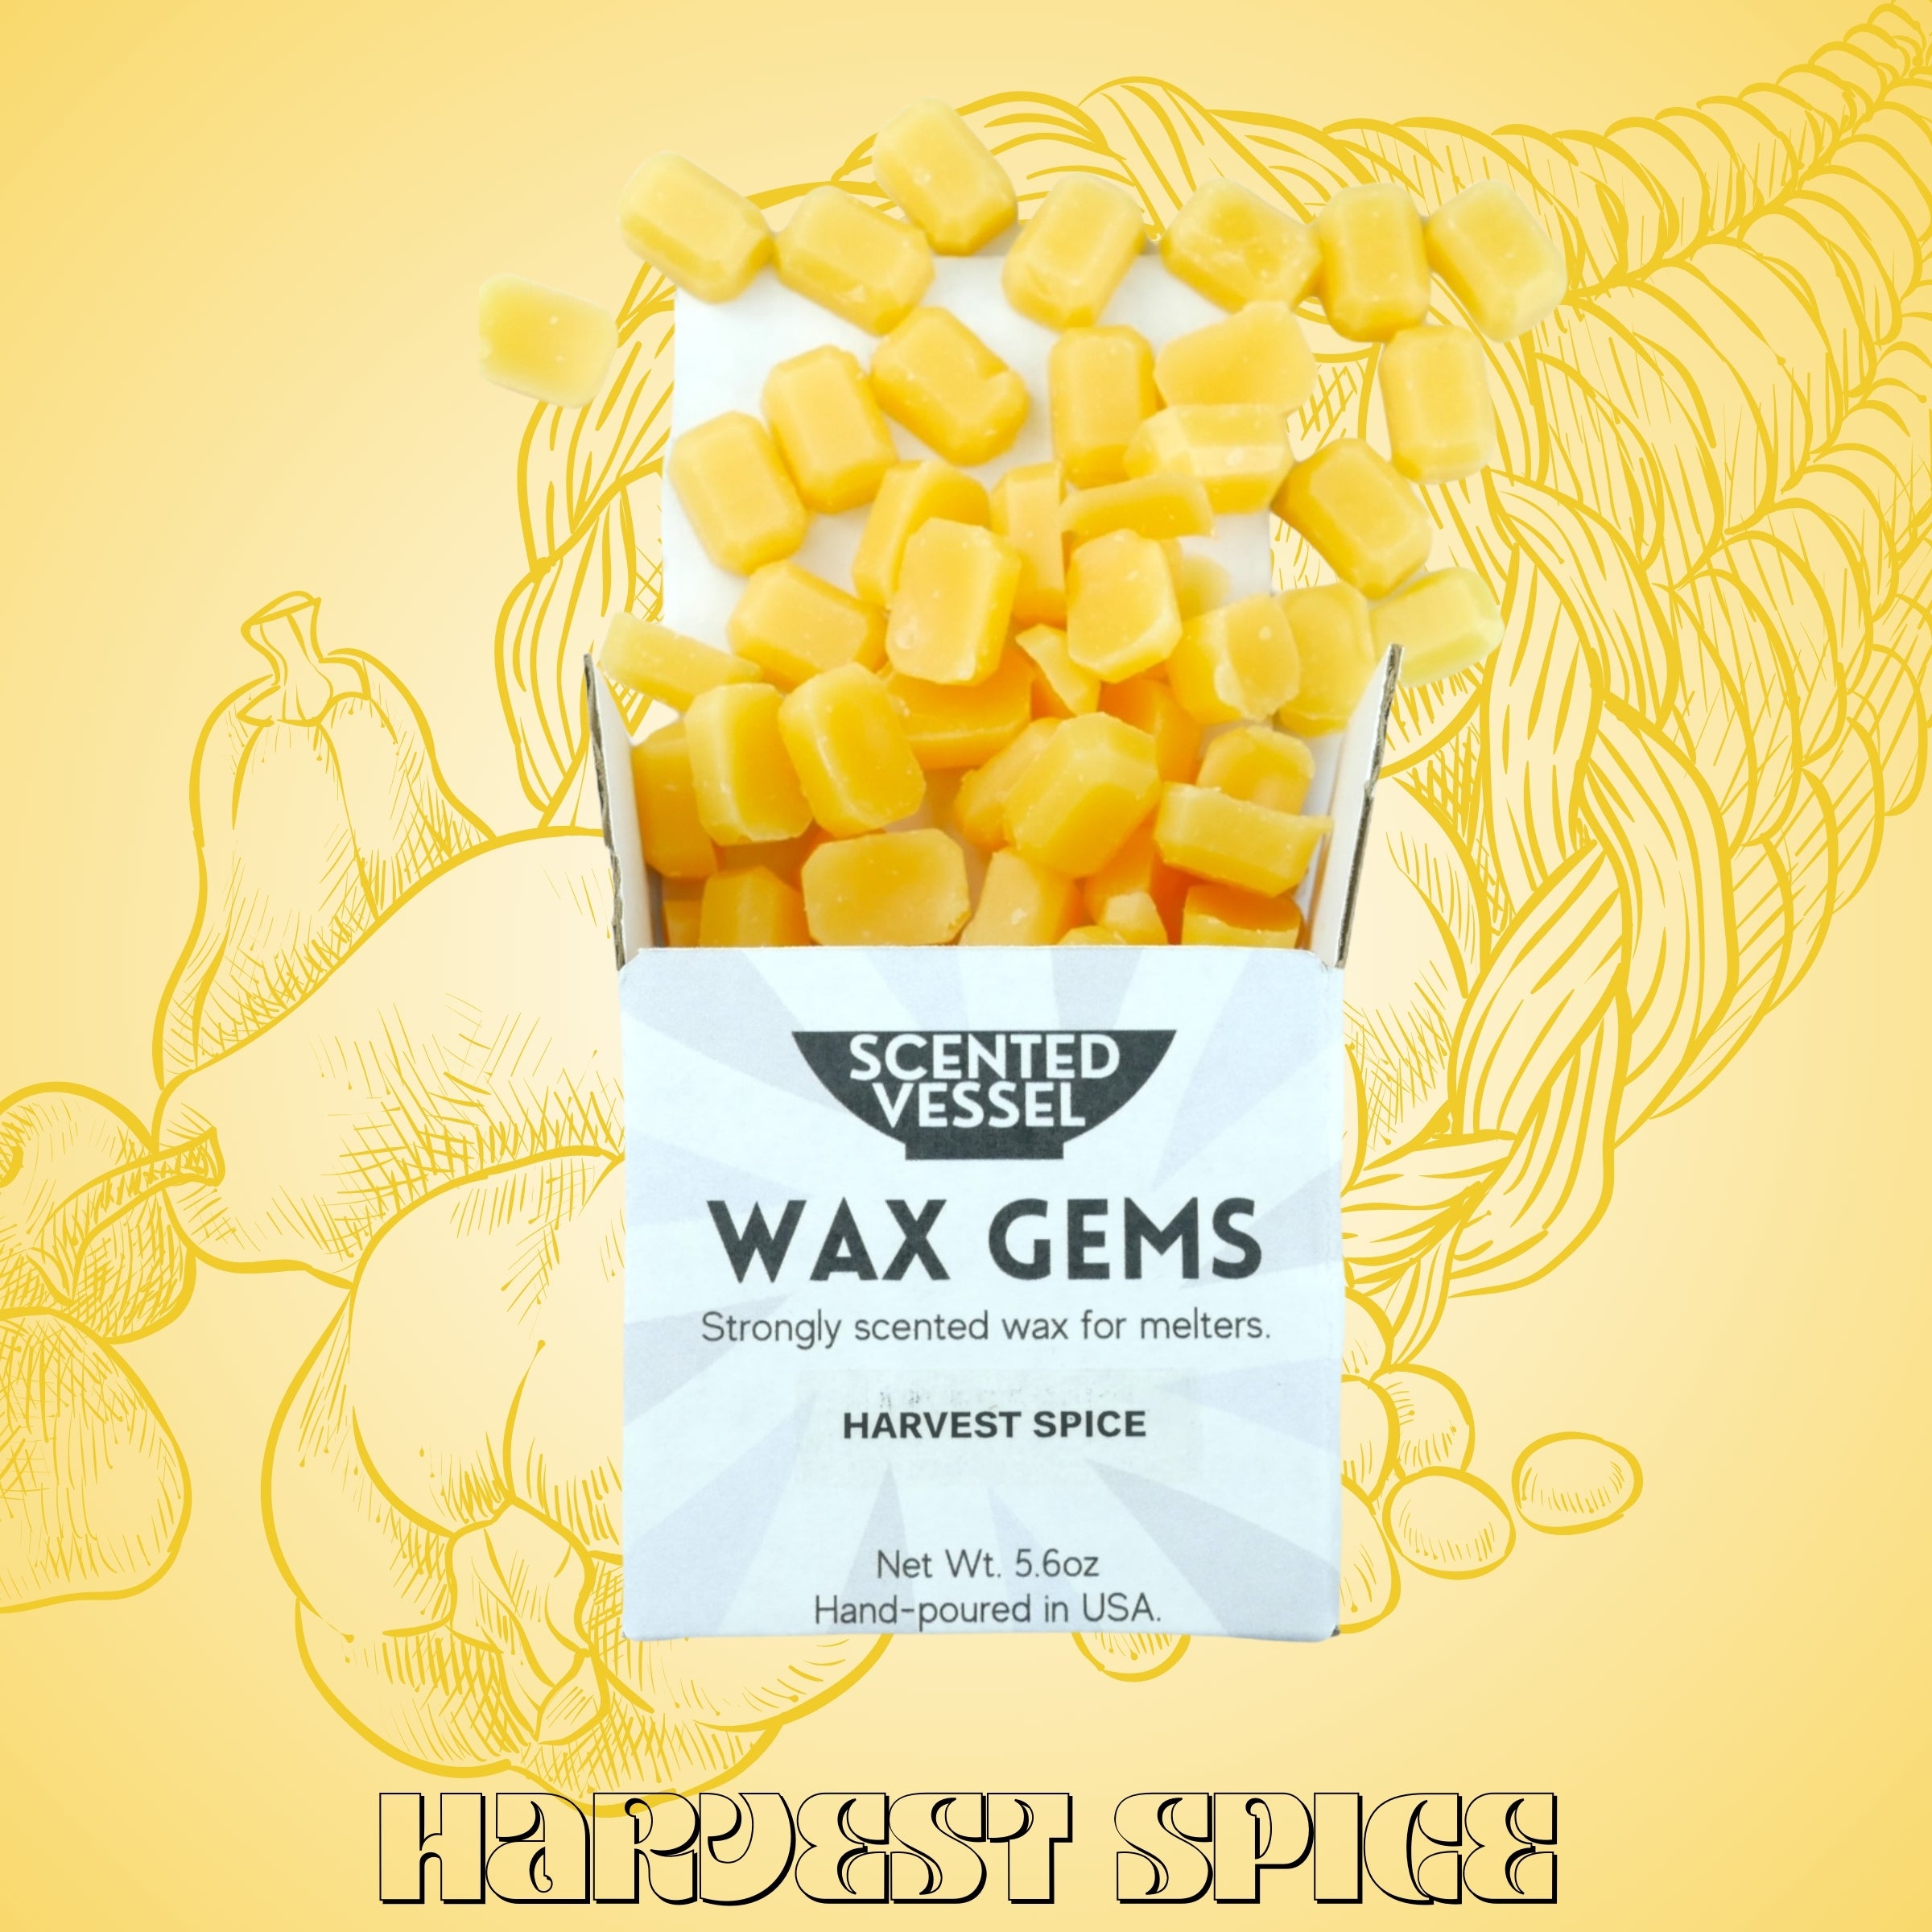 Harvest Spice 5.6oz Wax Gems by Scented Vessel